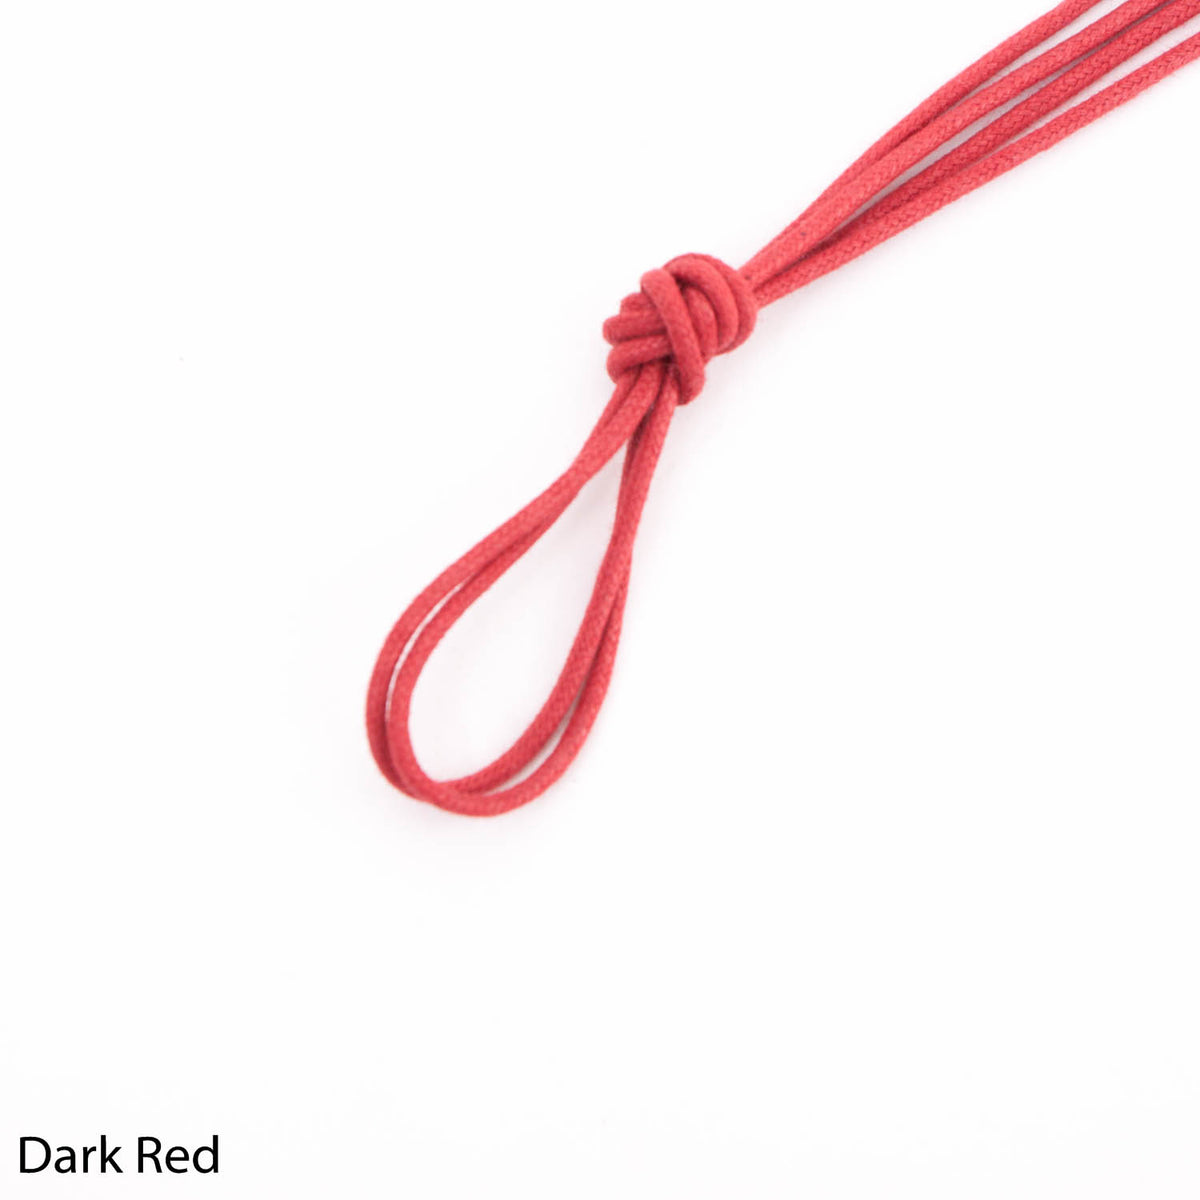 A Wellington Crimson Round Waxed Shoelace 80 cm with a knot on it, from KirbyAllison.com.